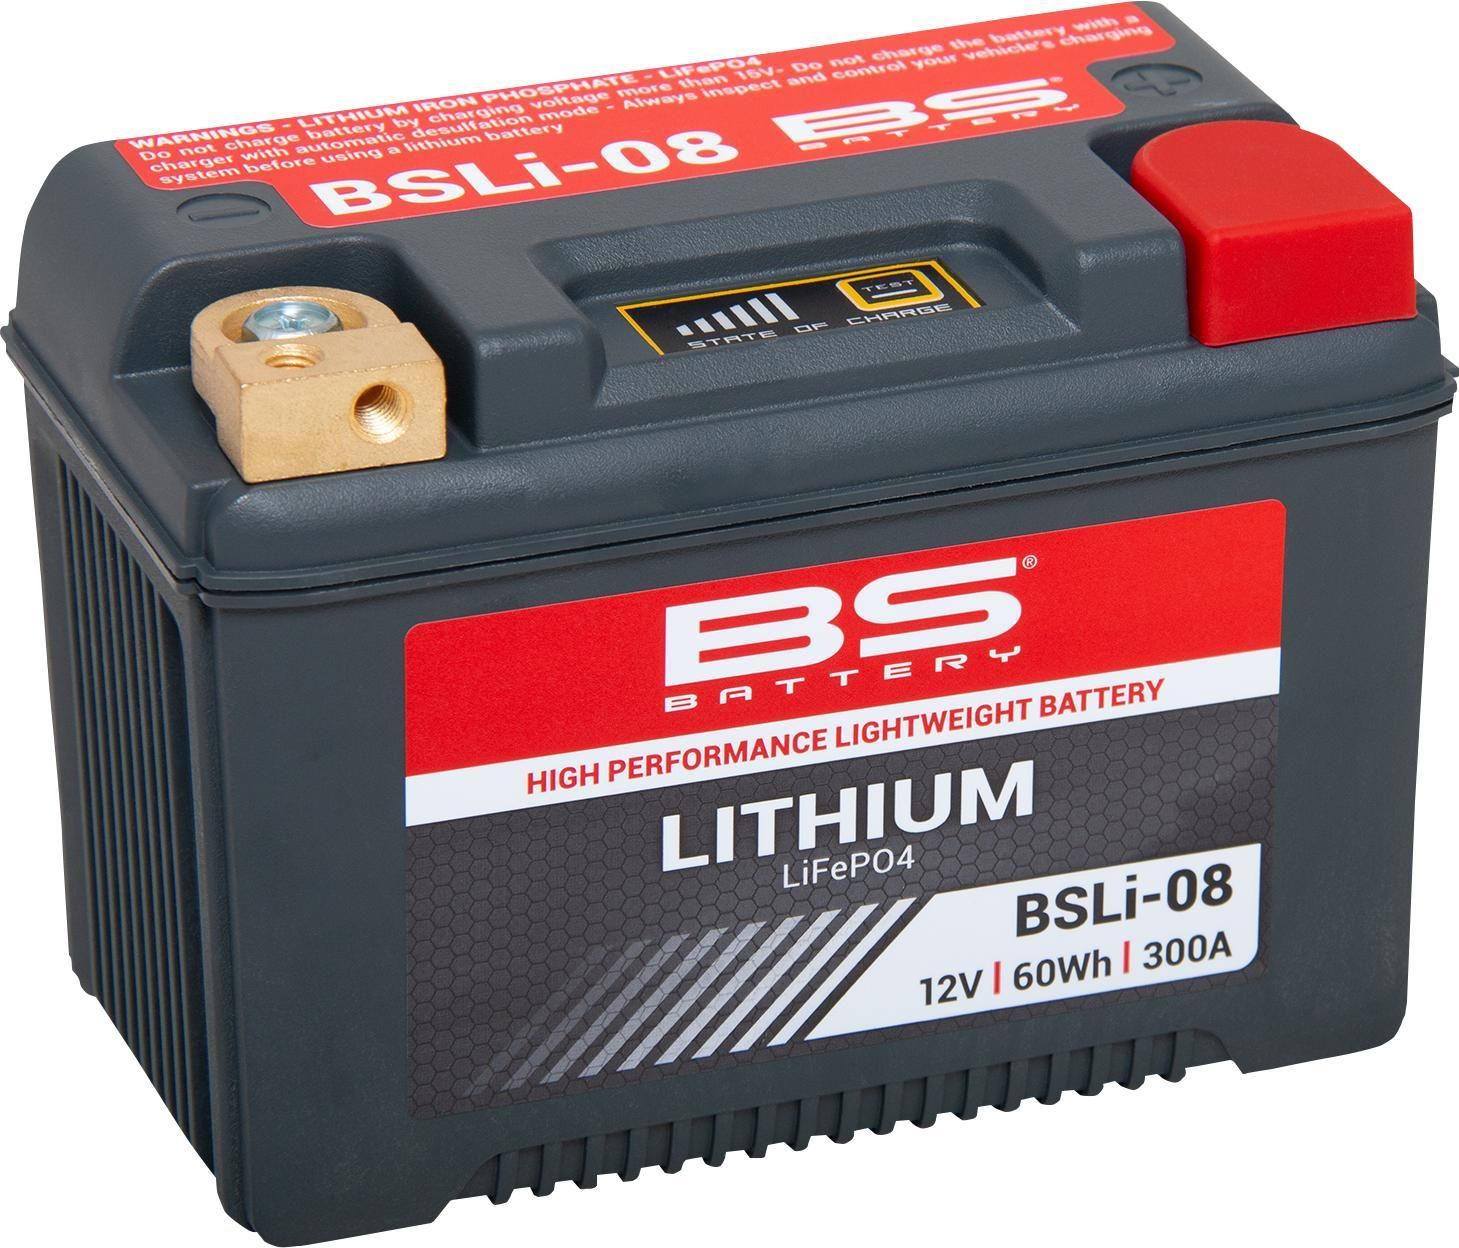 DHFF-BS-BATTERY-360108 Lithium Battery - BSLi-08